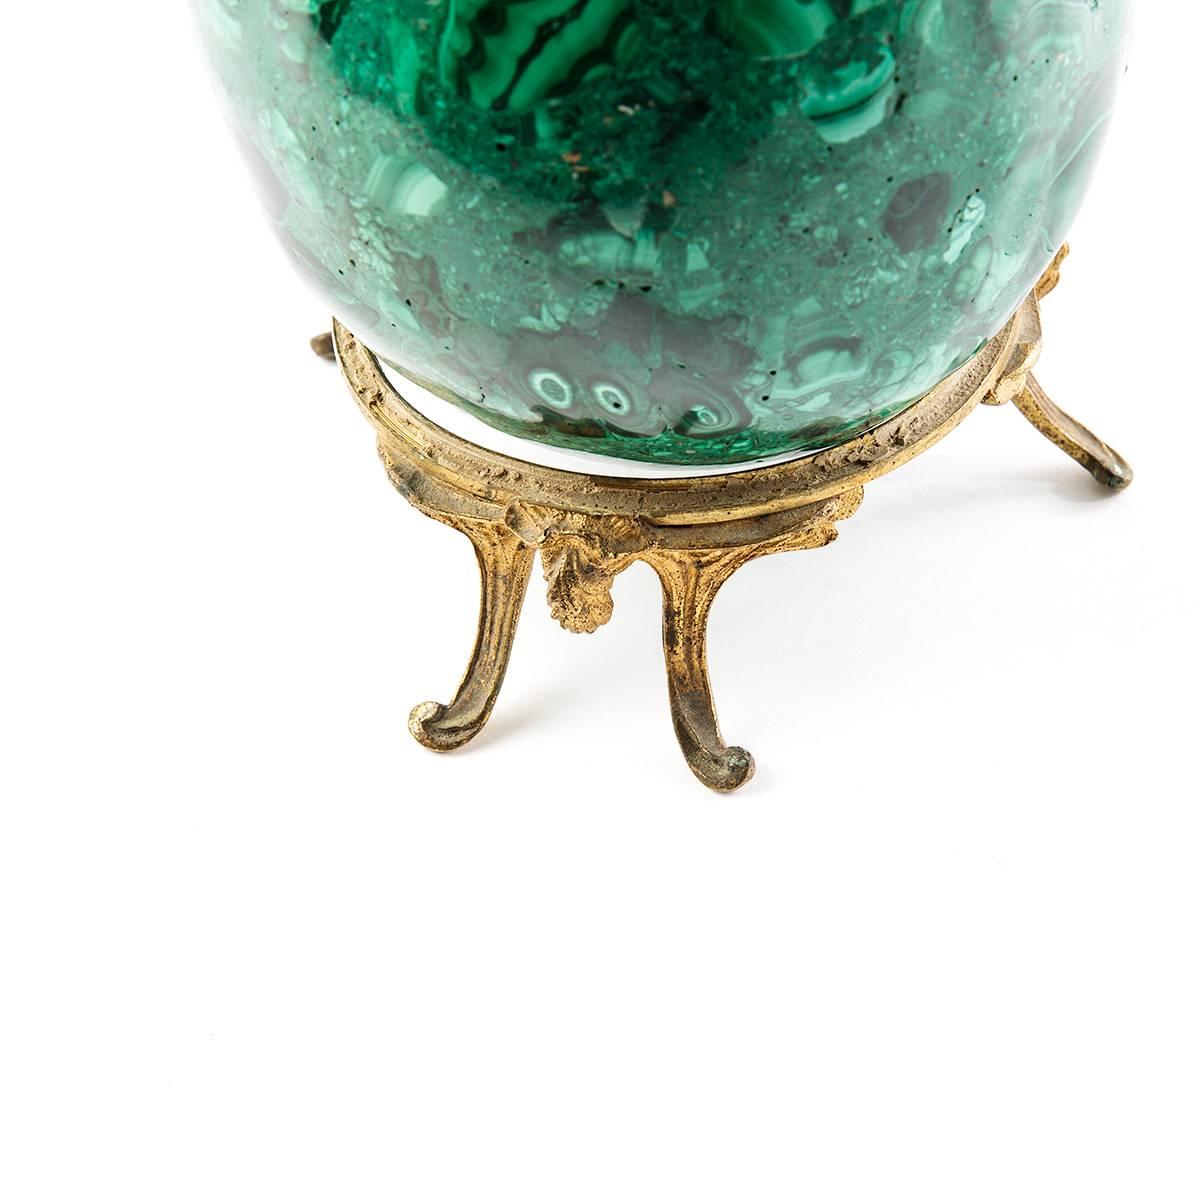 Malachite is a very powerful stone, which generates special healing powers when used alone or in combination with other stones. When used as malachite water or tea it purifies and detoxifies the arteries, vessels and organs of accumulated residues